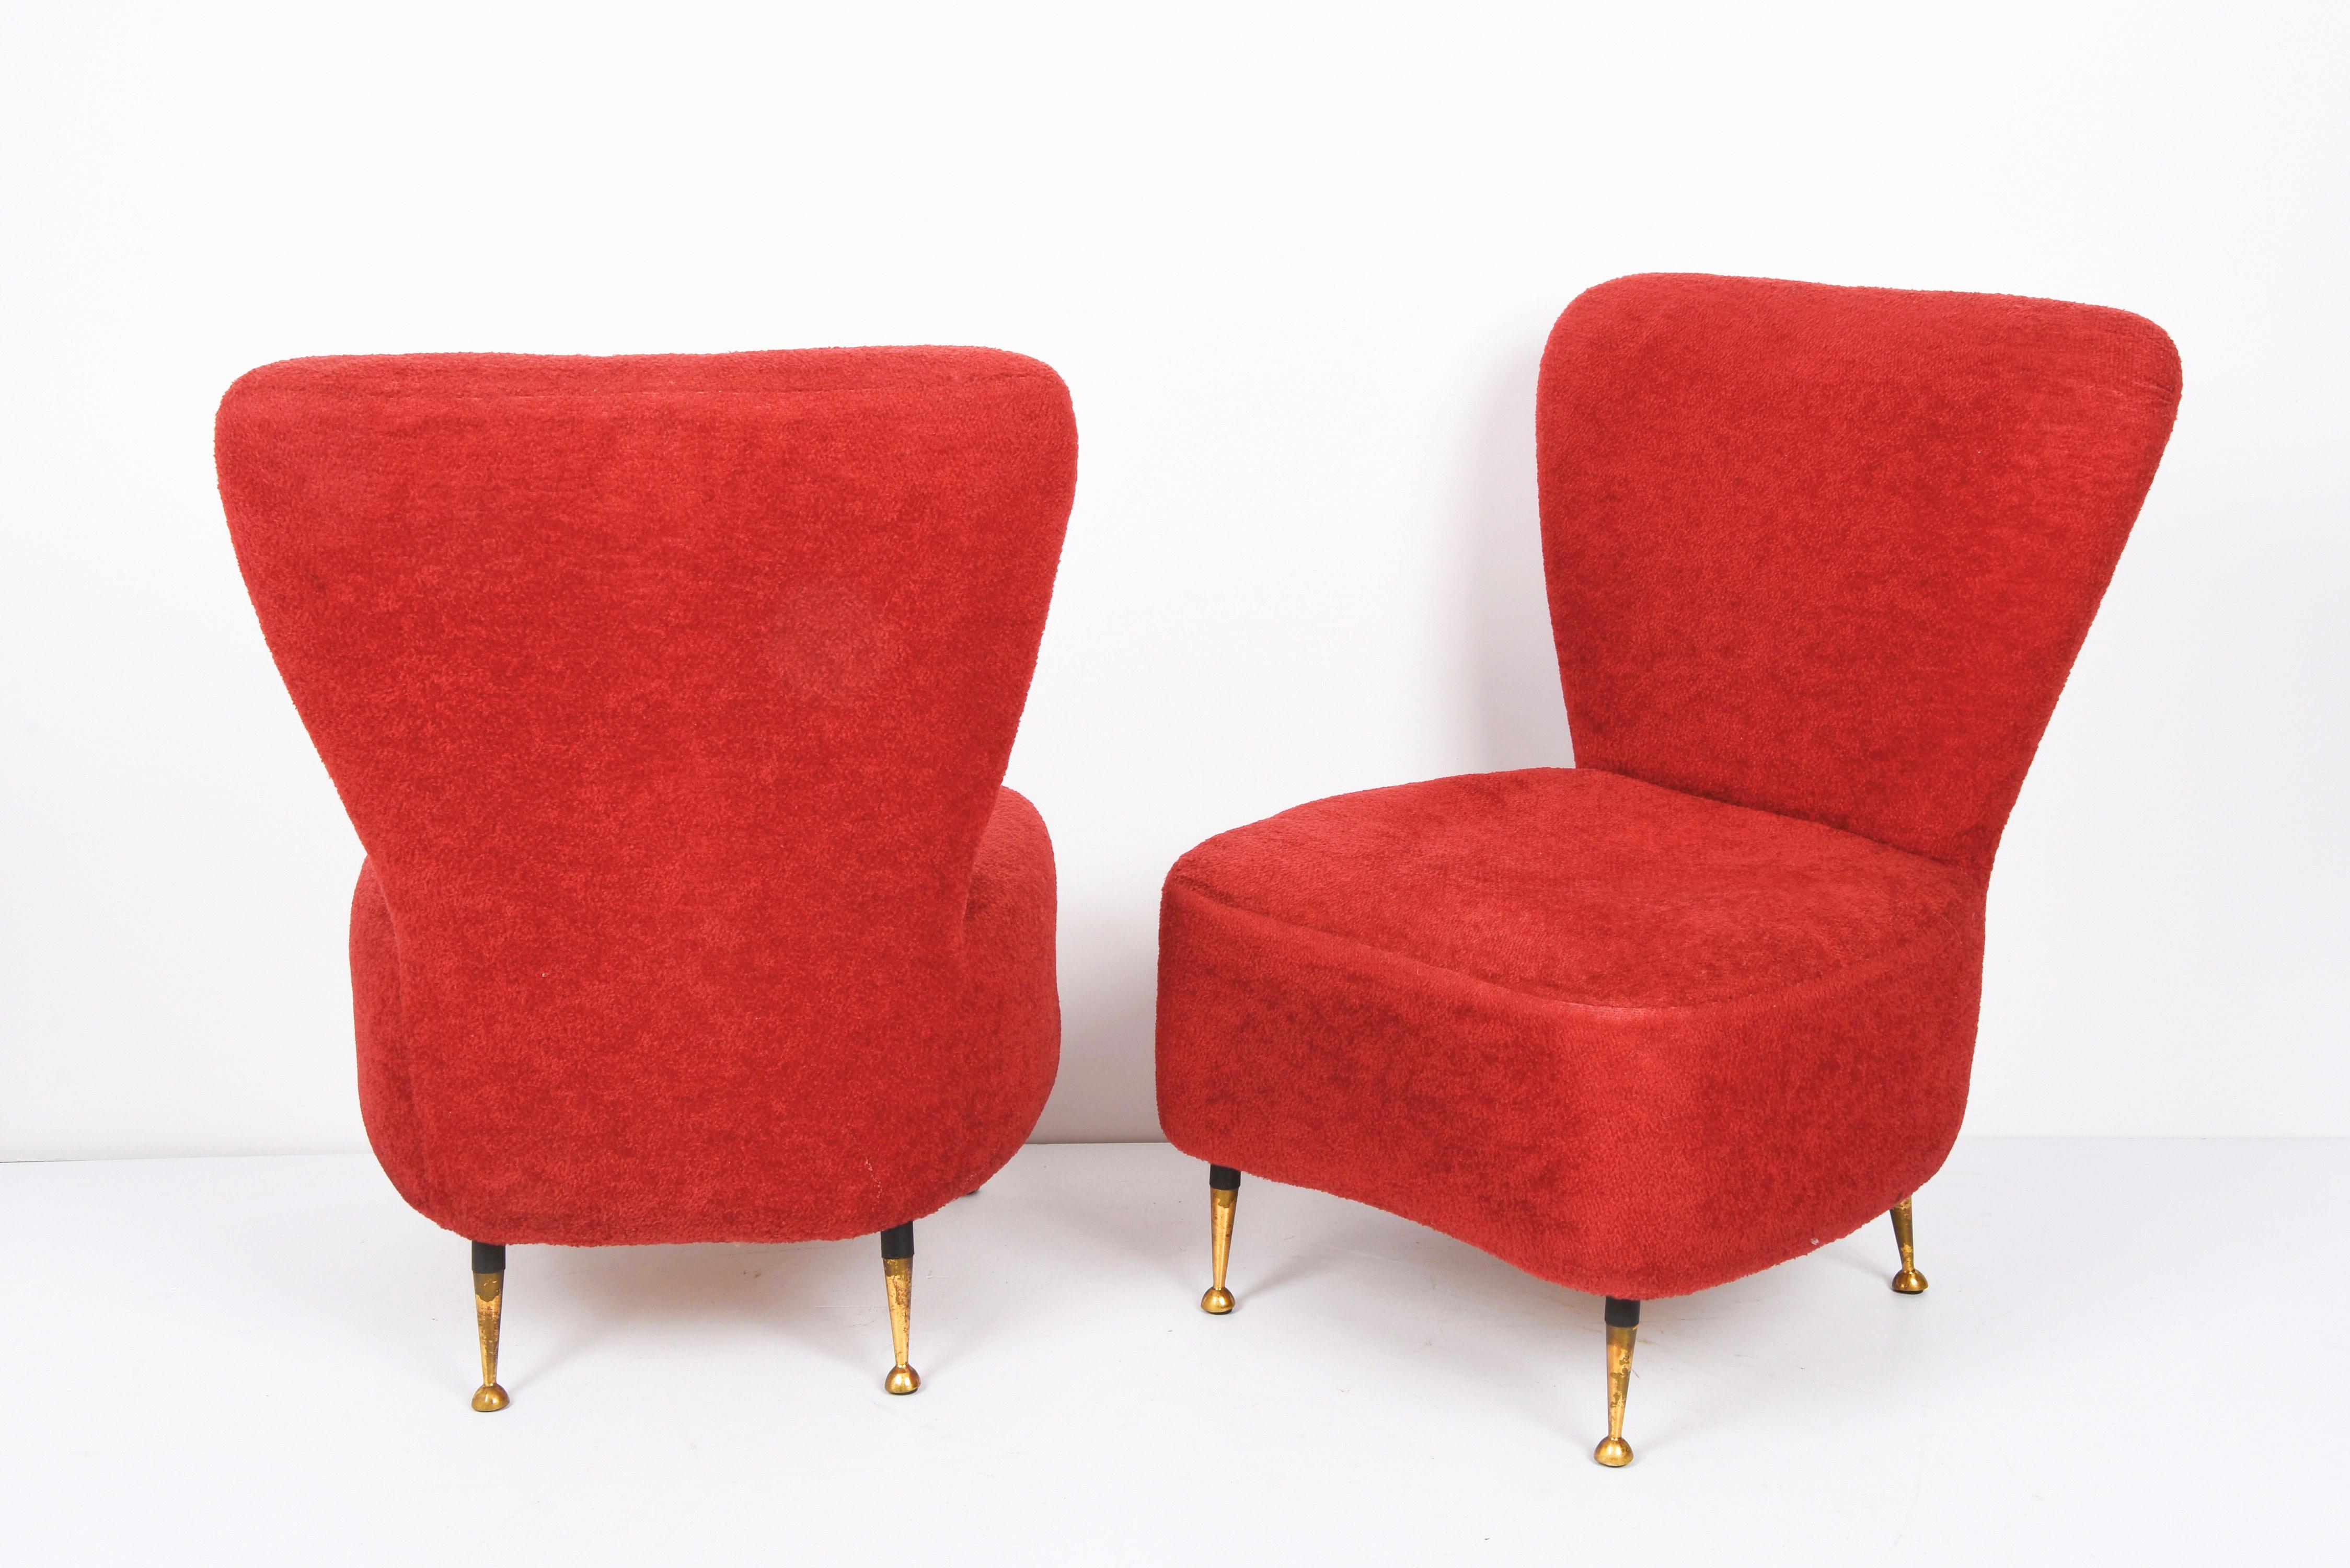 Mid-Century Modern Pair of Red Bouclé Wool and Fabric Italian Armchairs with Brass Feet, 1950s